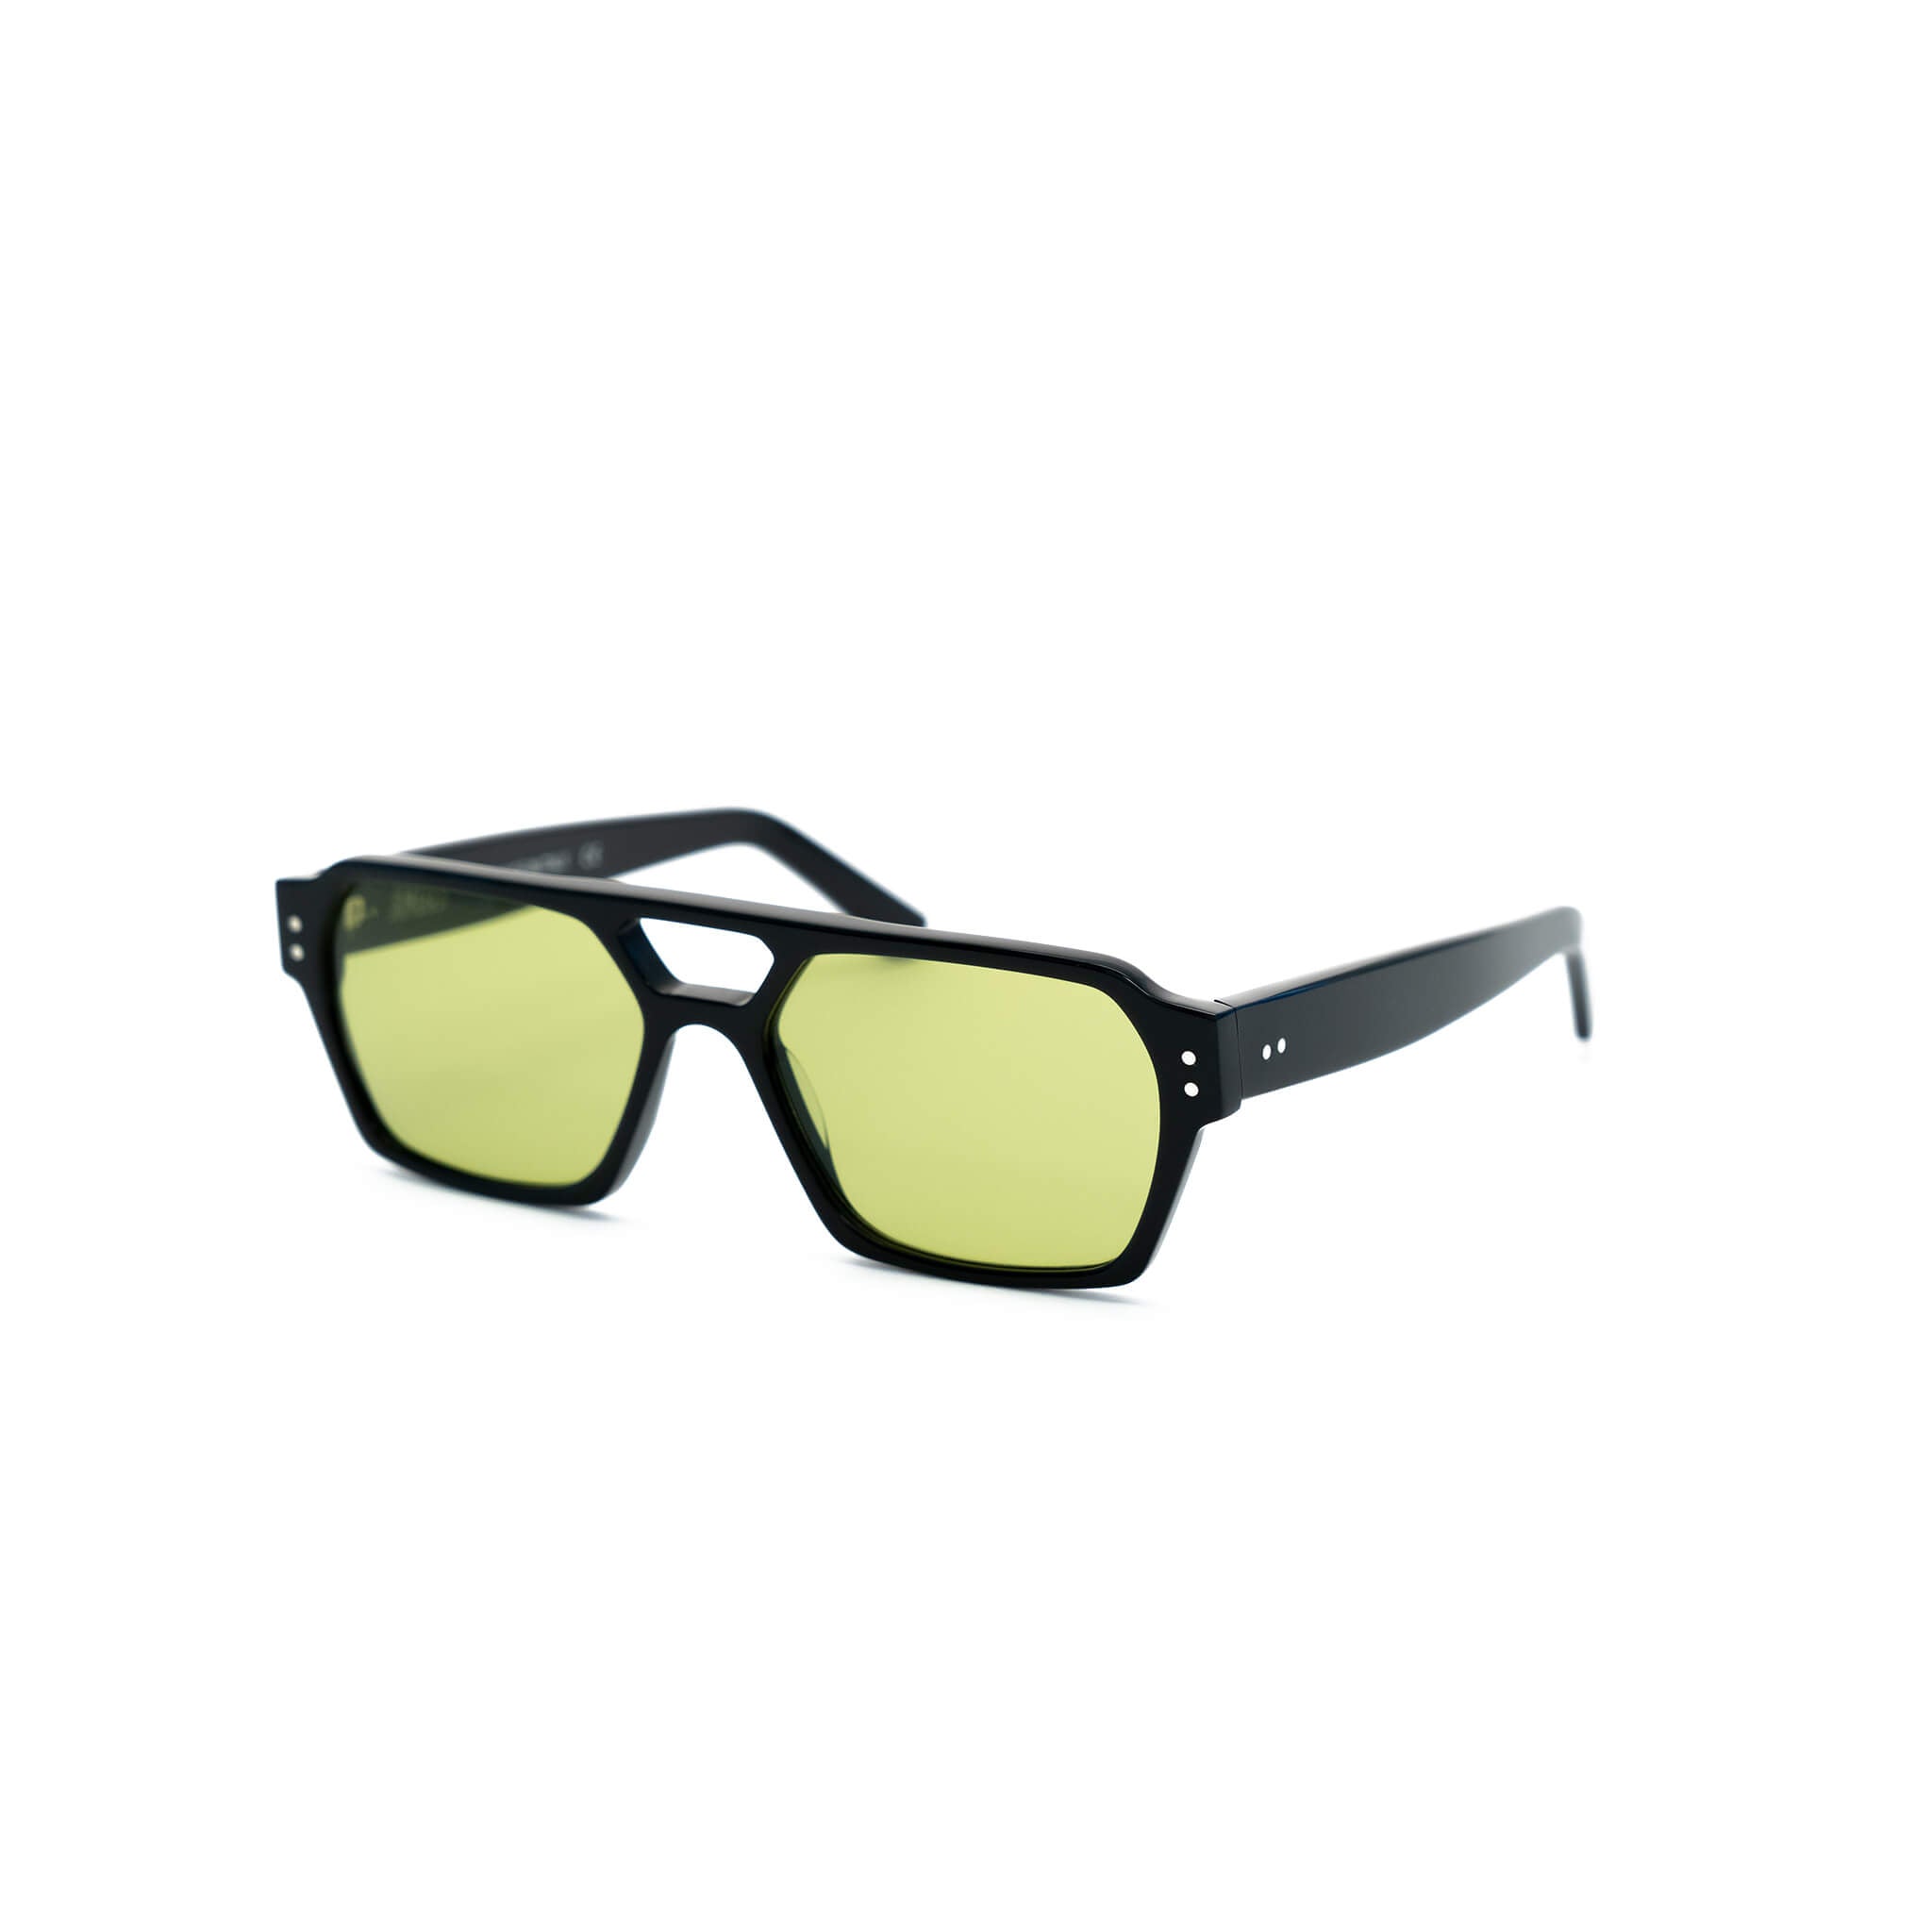 Ego sunglasses in black and green from Ameos side angle